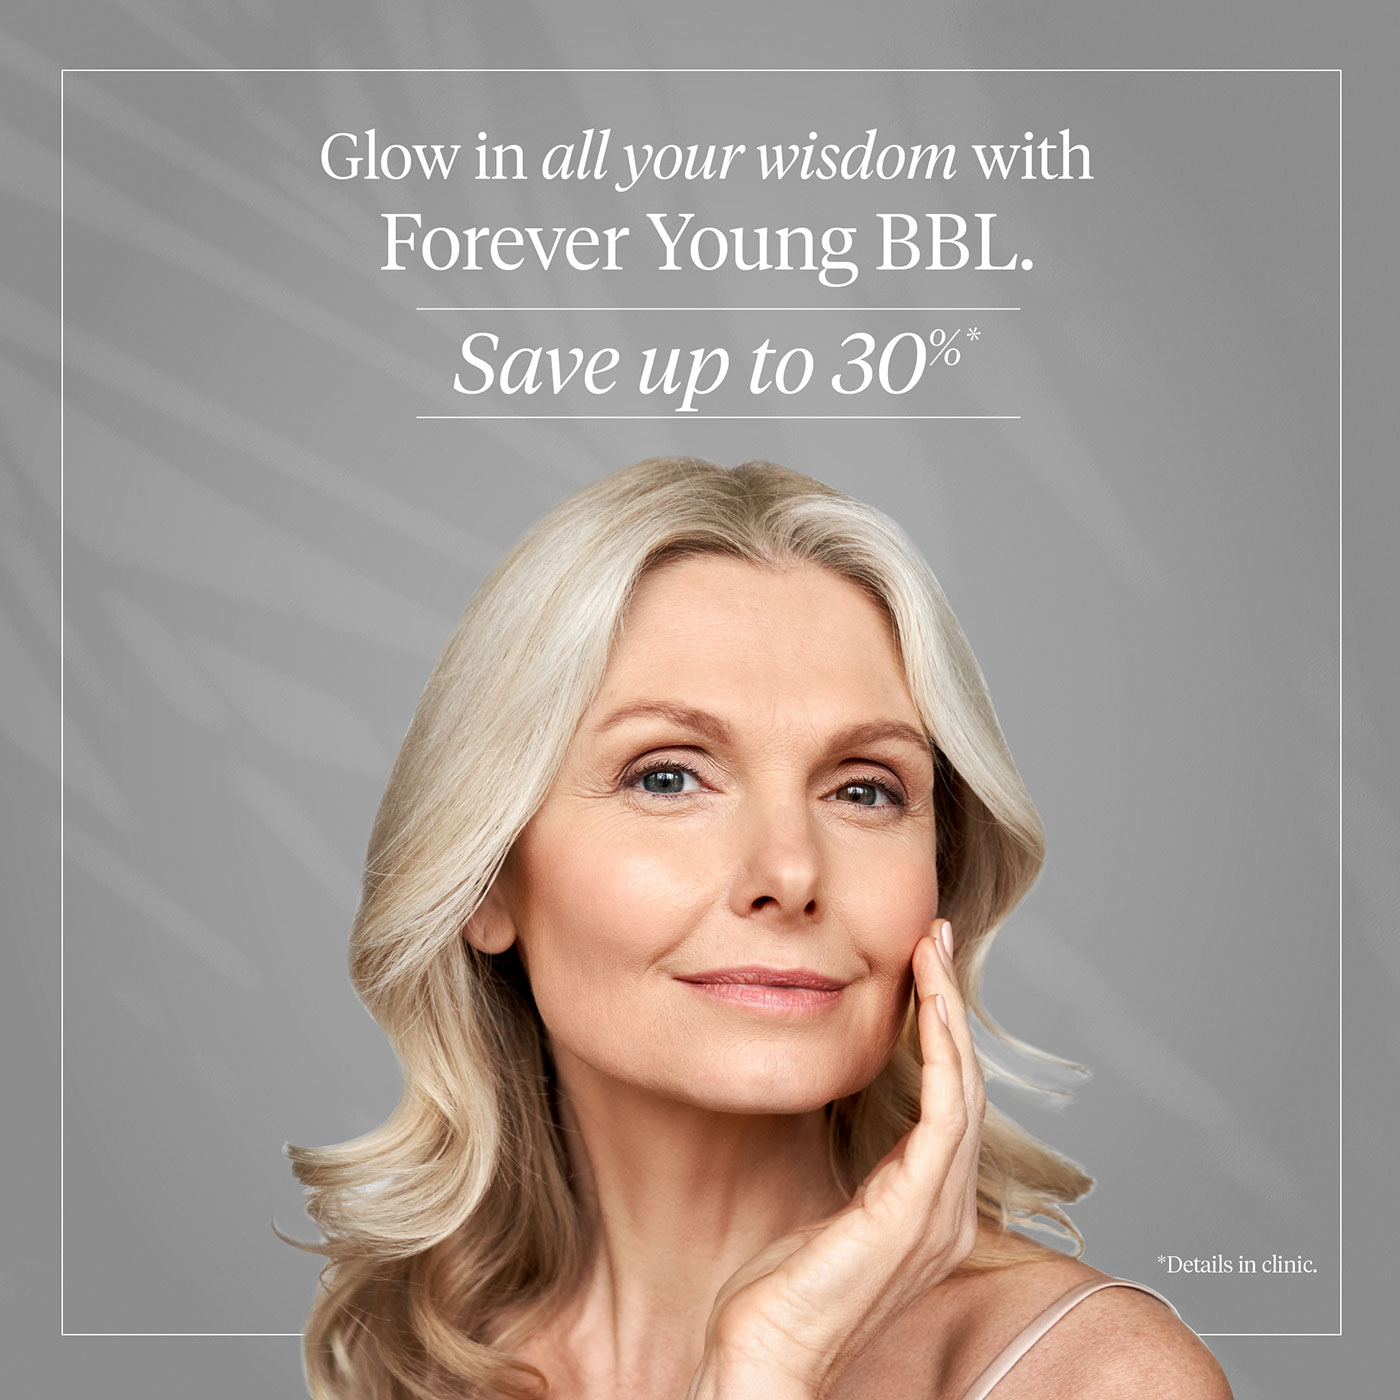 Glow in all your wisdom with Forever Young BBL. Save up to 30%. Details in clinic